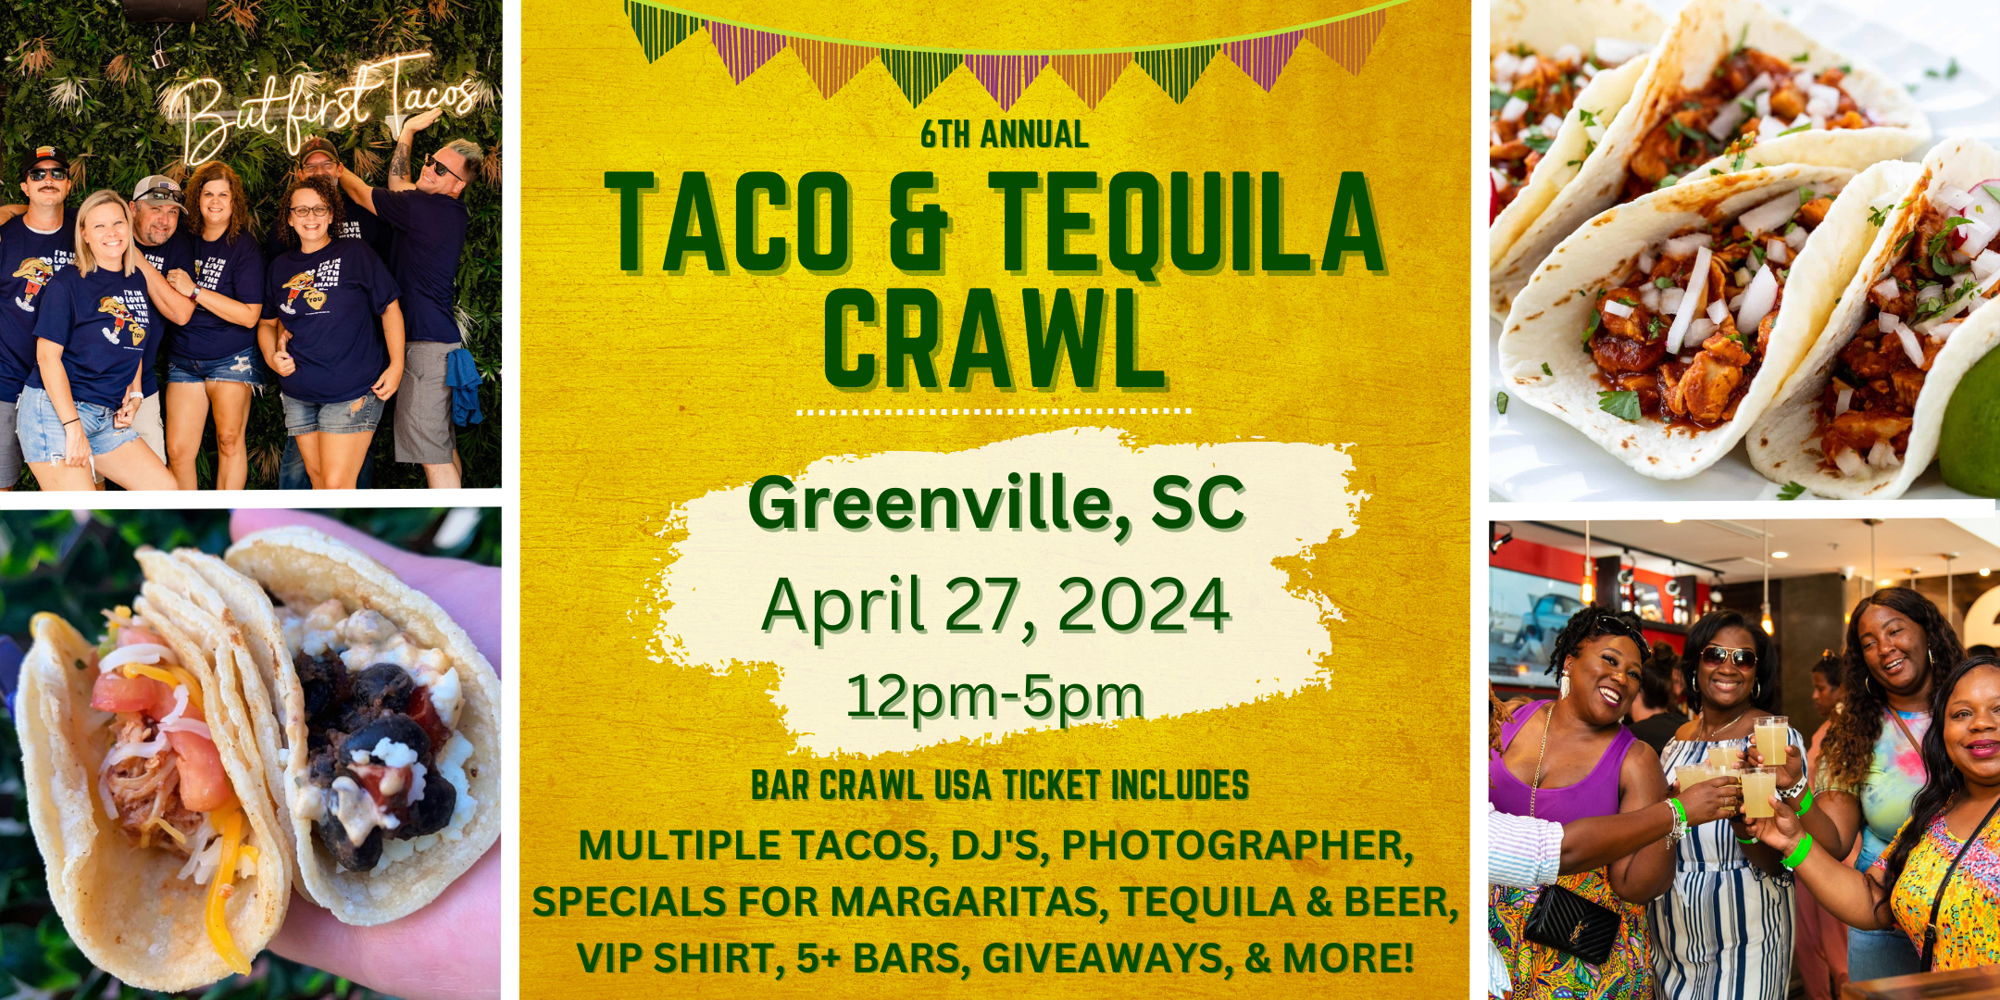 Greenville Taco & Tequila Bar Crawl: 6th Annual promotional image